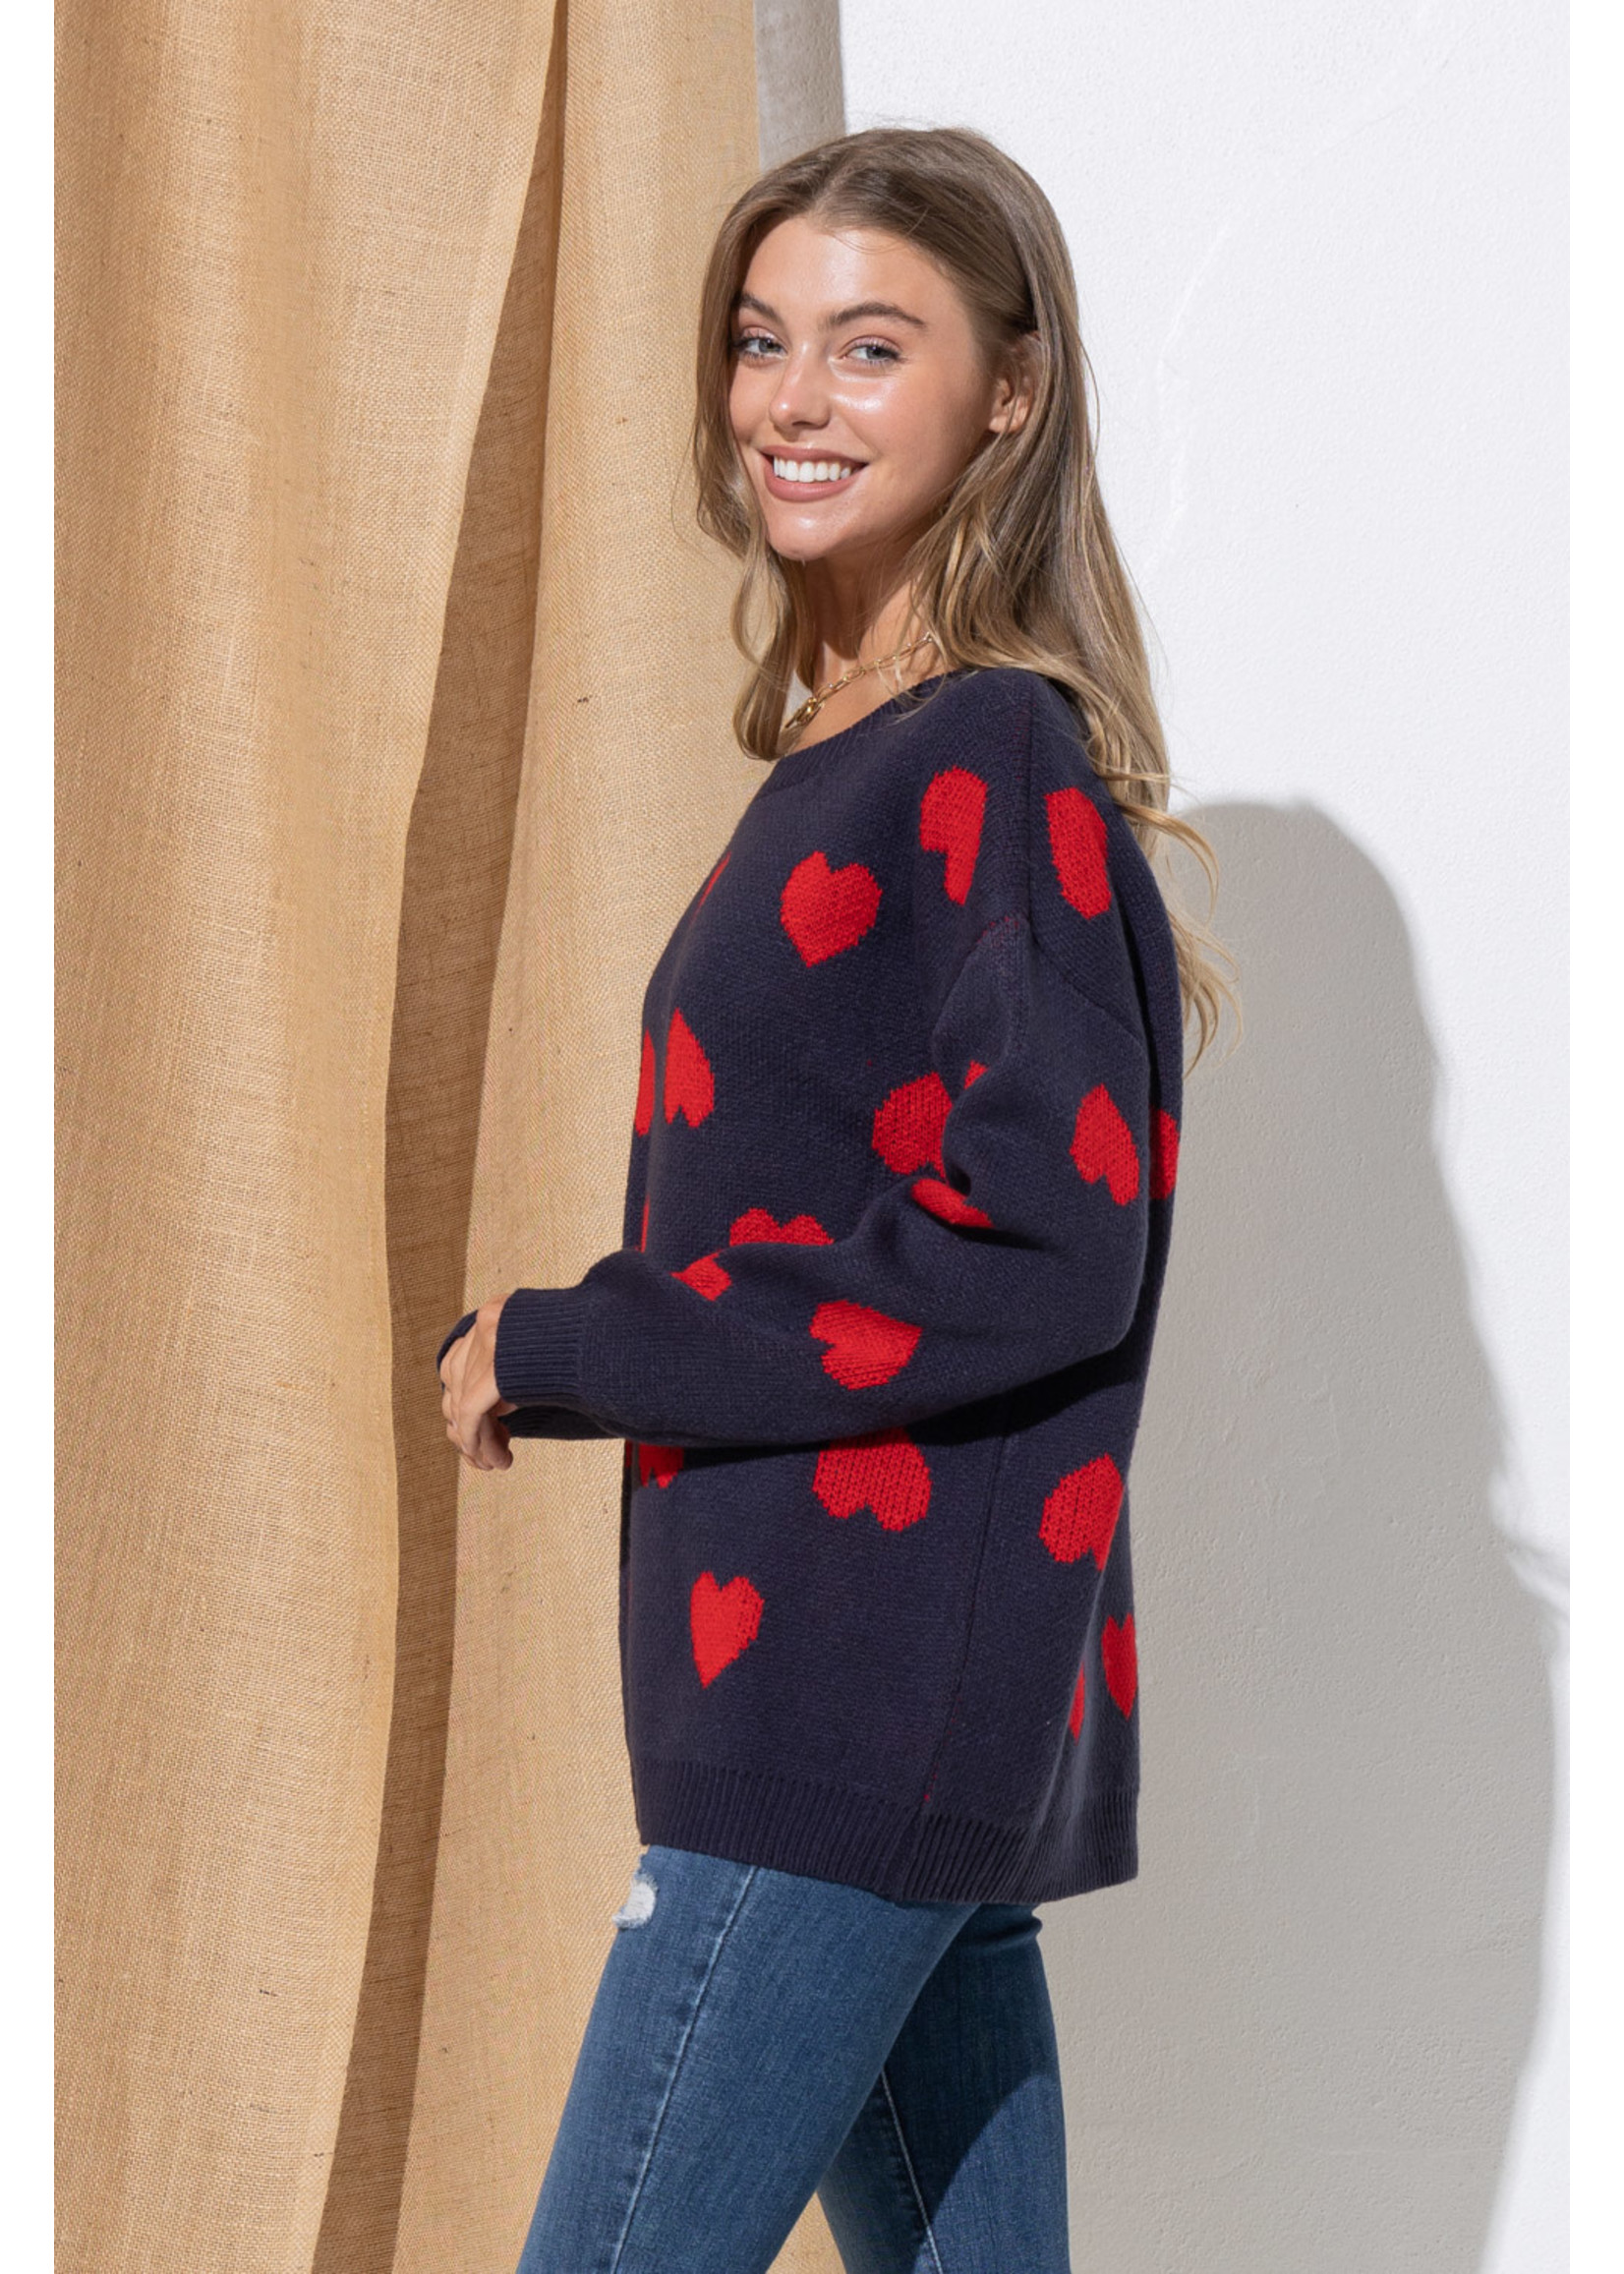 Cozy Co. Heart Print Knit Round Neck Sweater- Navy